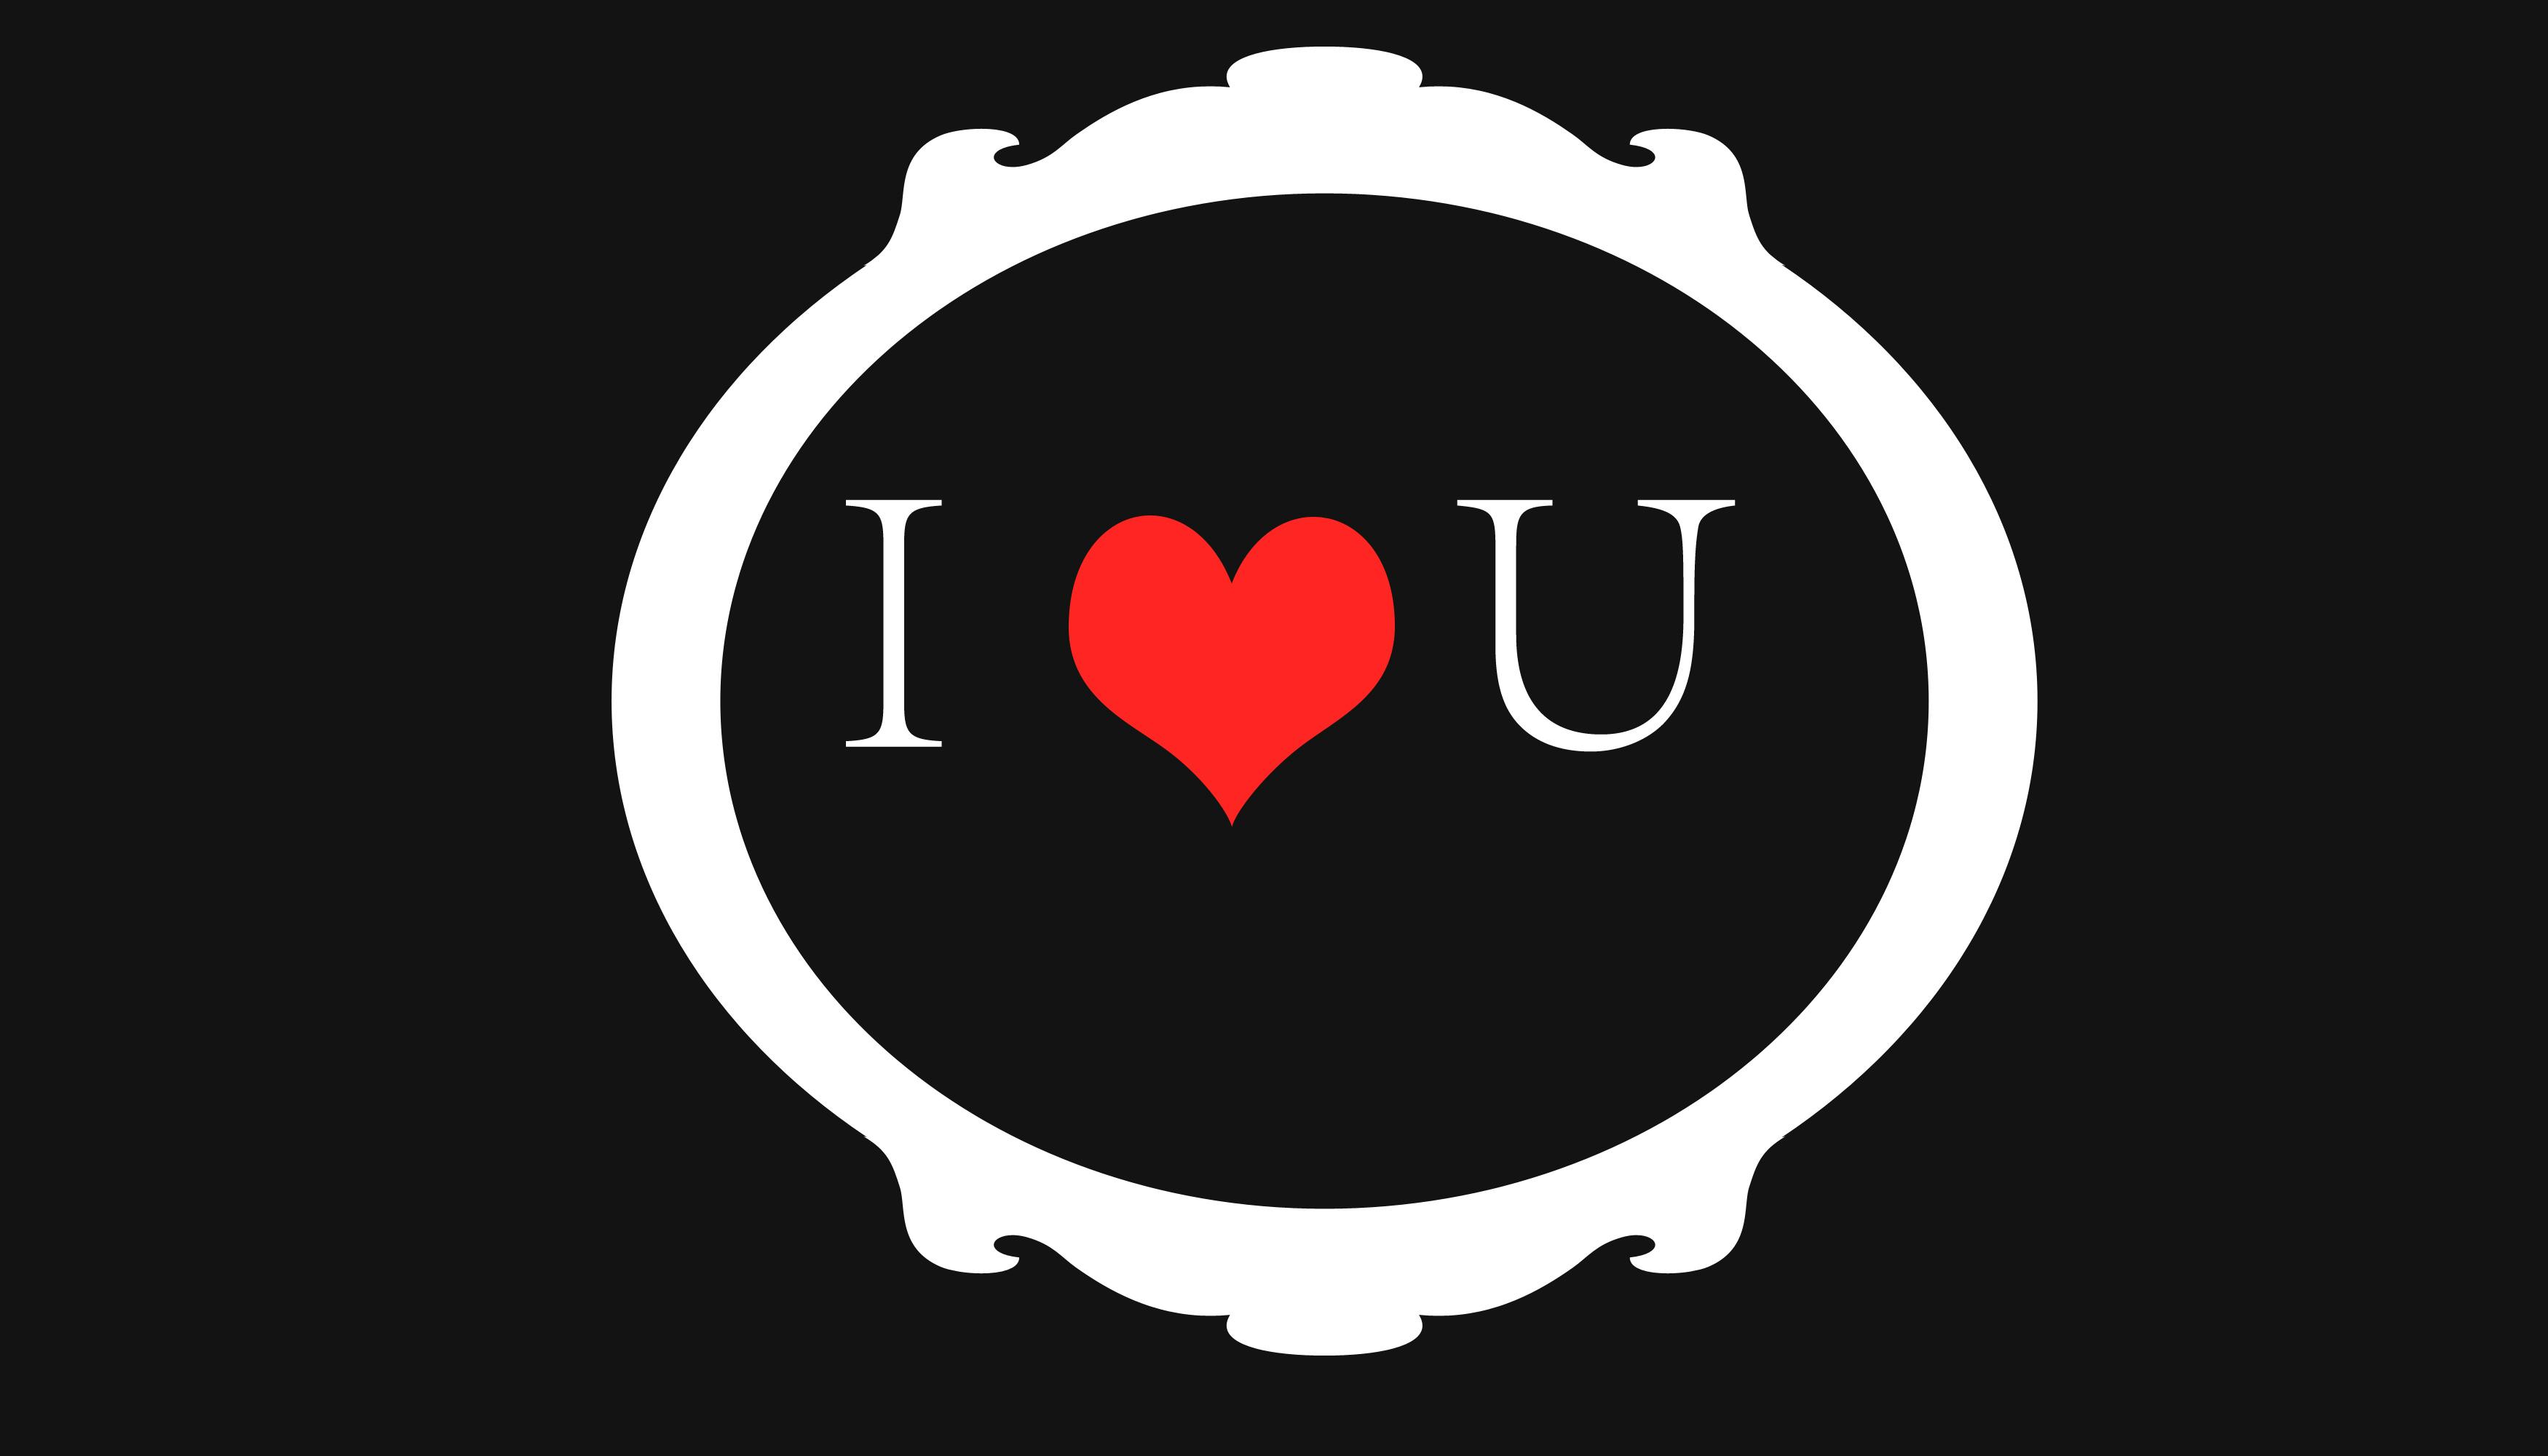 Free stock photo of i love you, i love you poster, vector of i love you